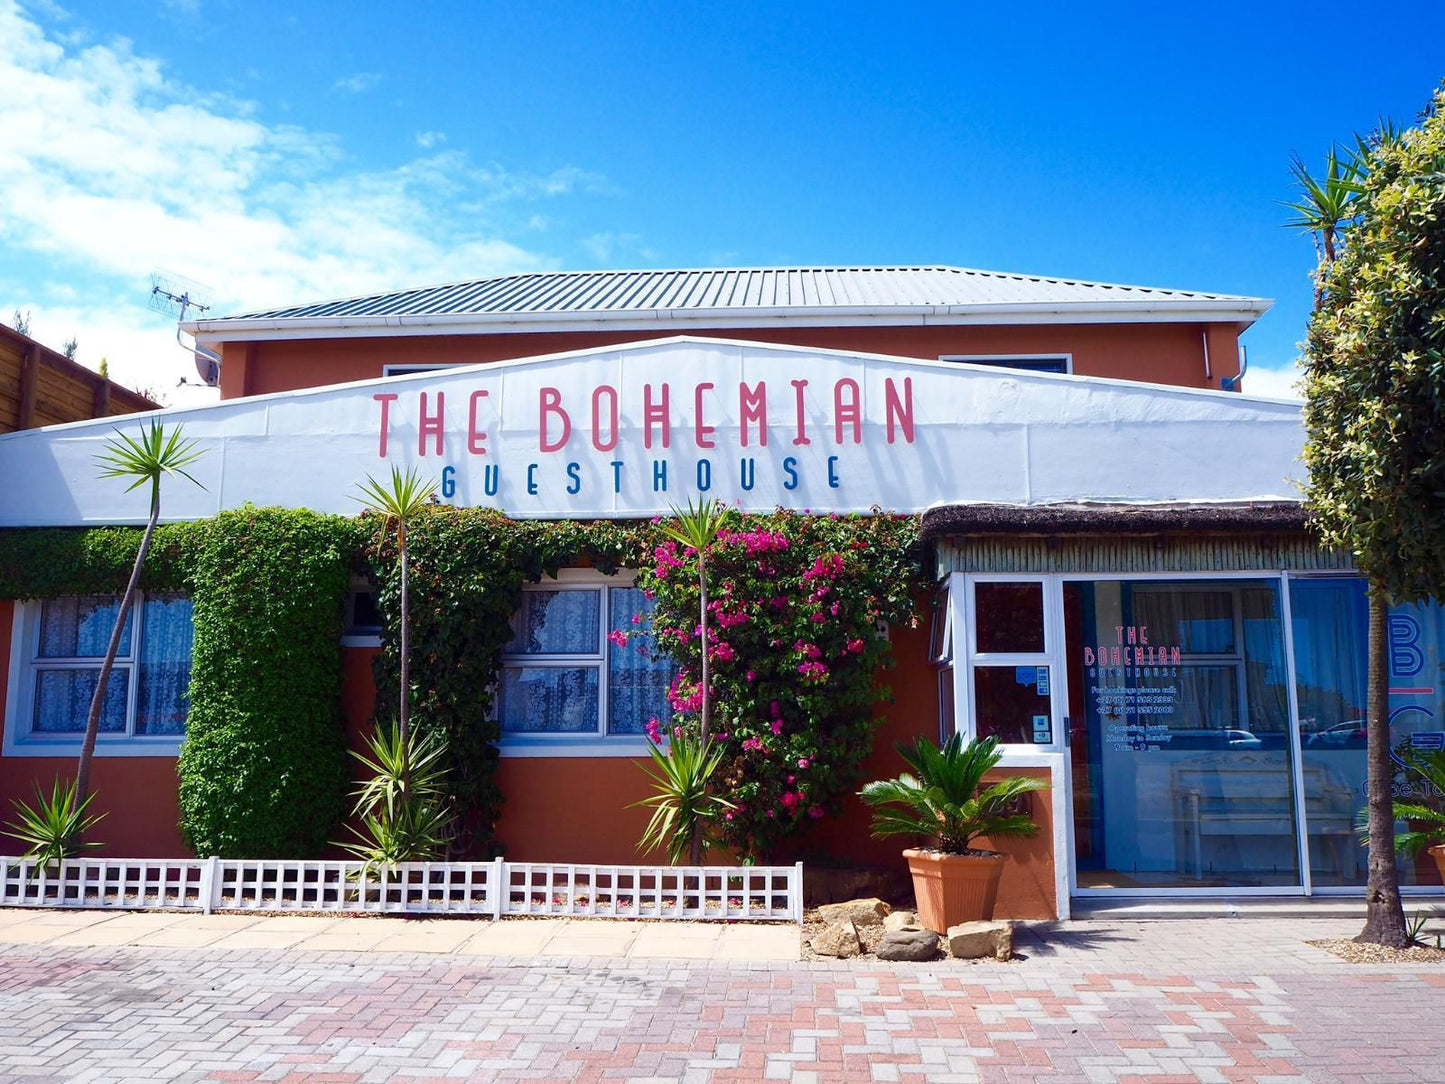 The Bohemian Guesthouse Century City Cape Town Western Cape South Africa House, Building, Architecture, Sign, Bar